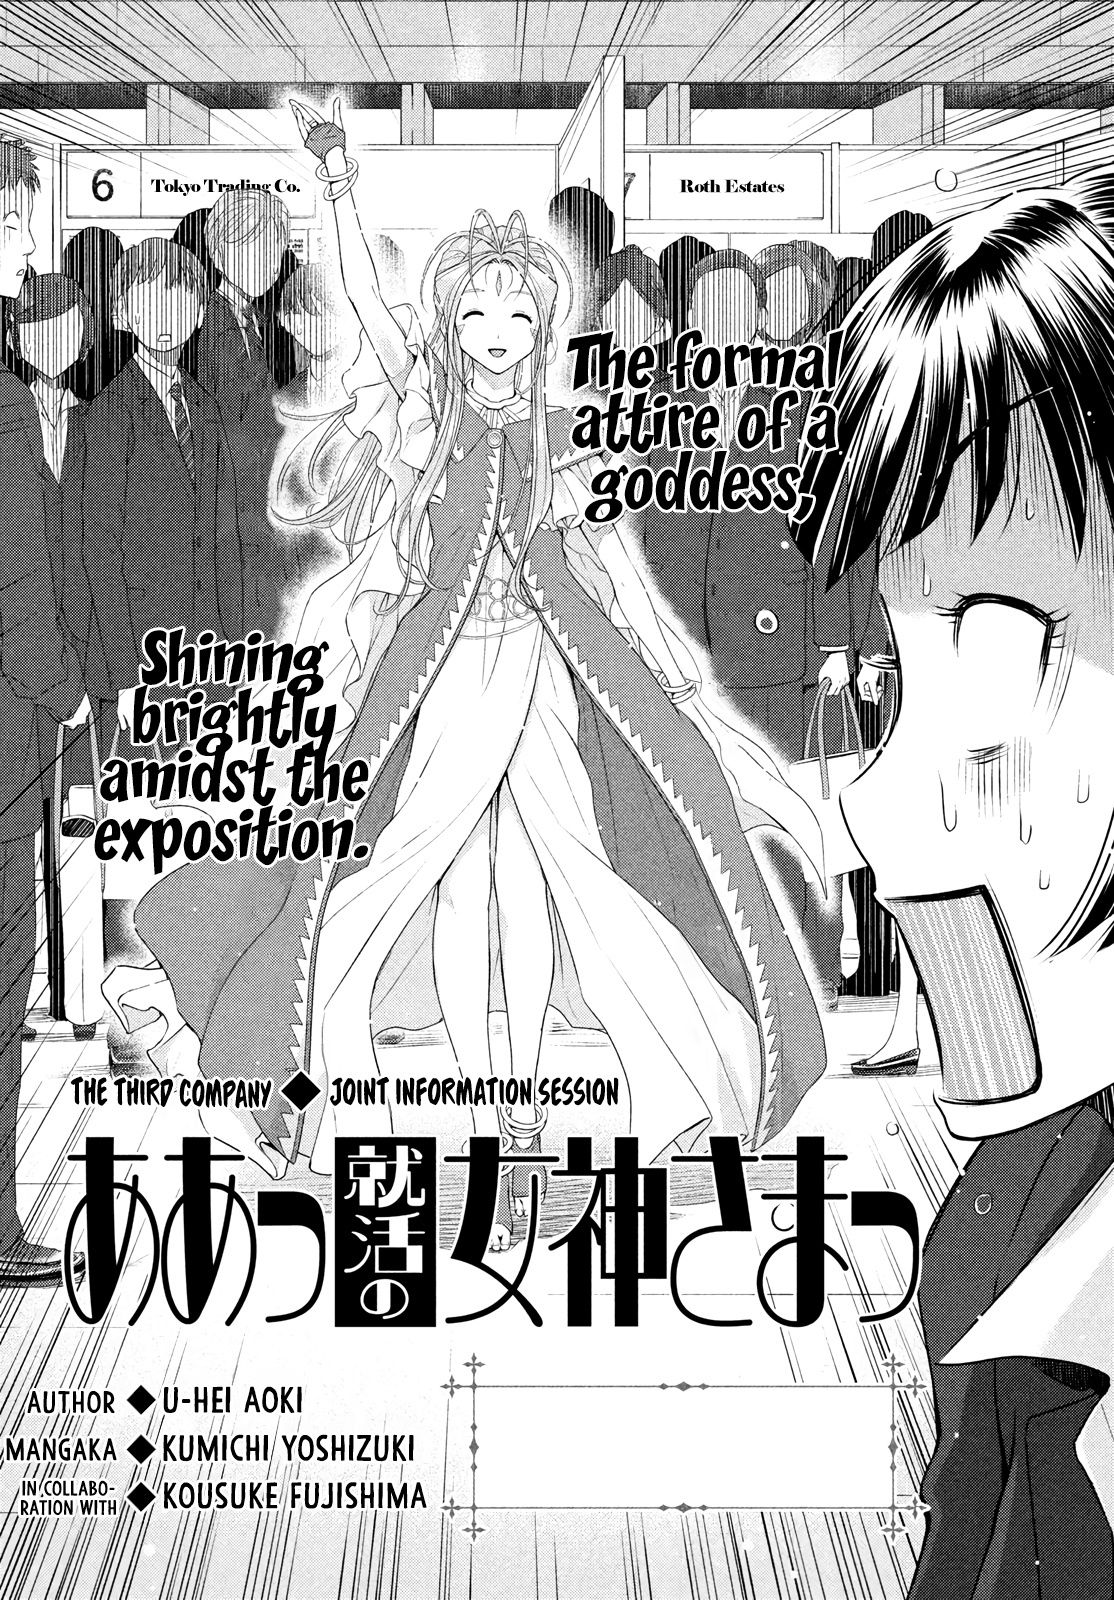 Ah! My Job-Hunting Goddess Vol.1 Chapter 3: The Third Company - Joint Information Session - Picture 3